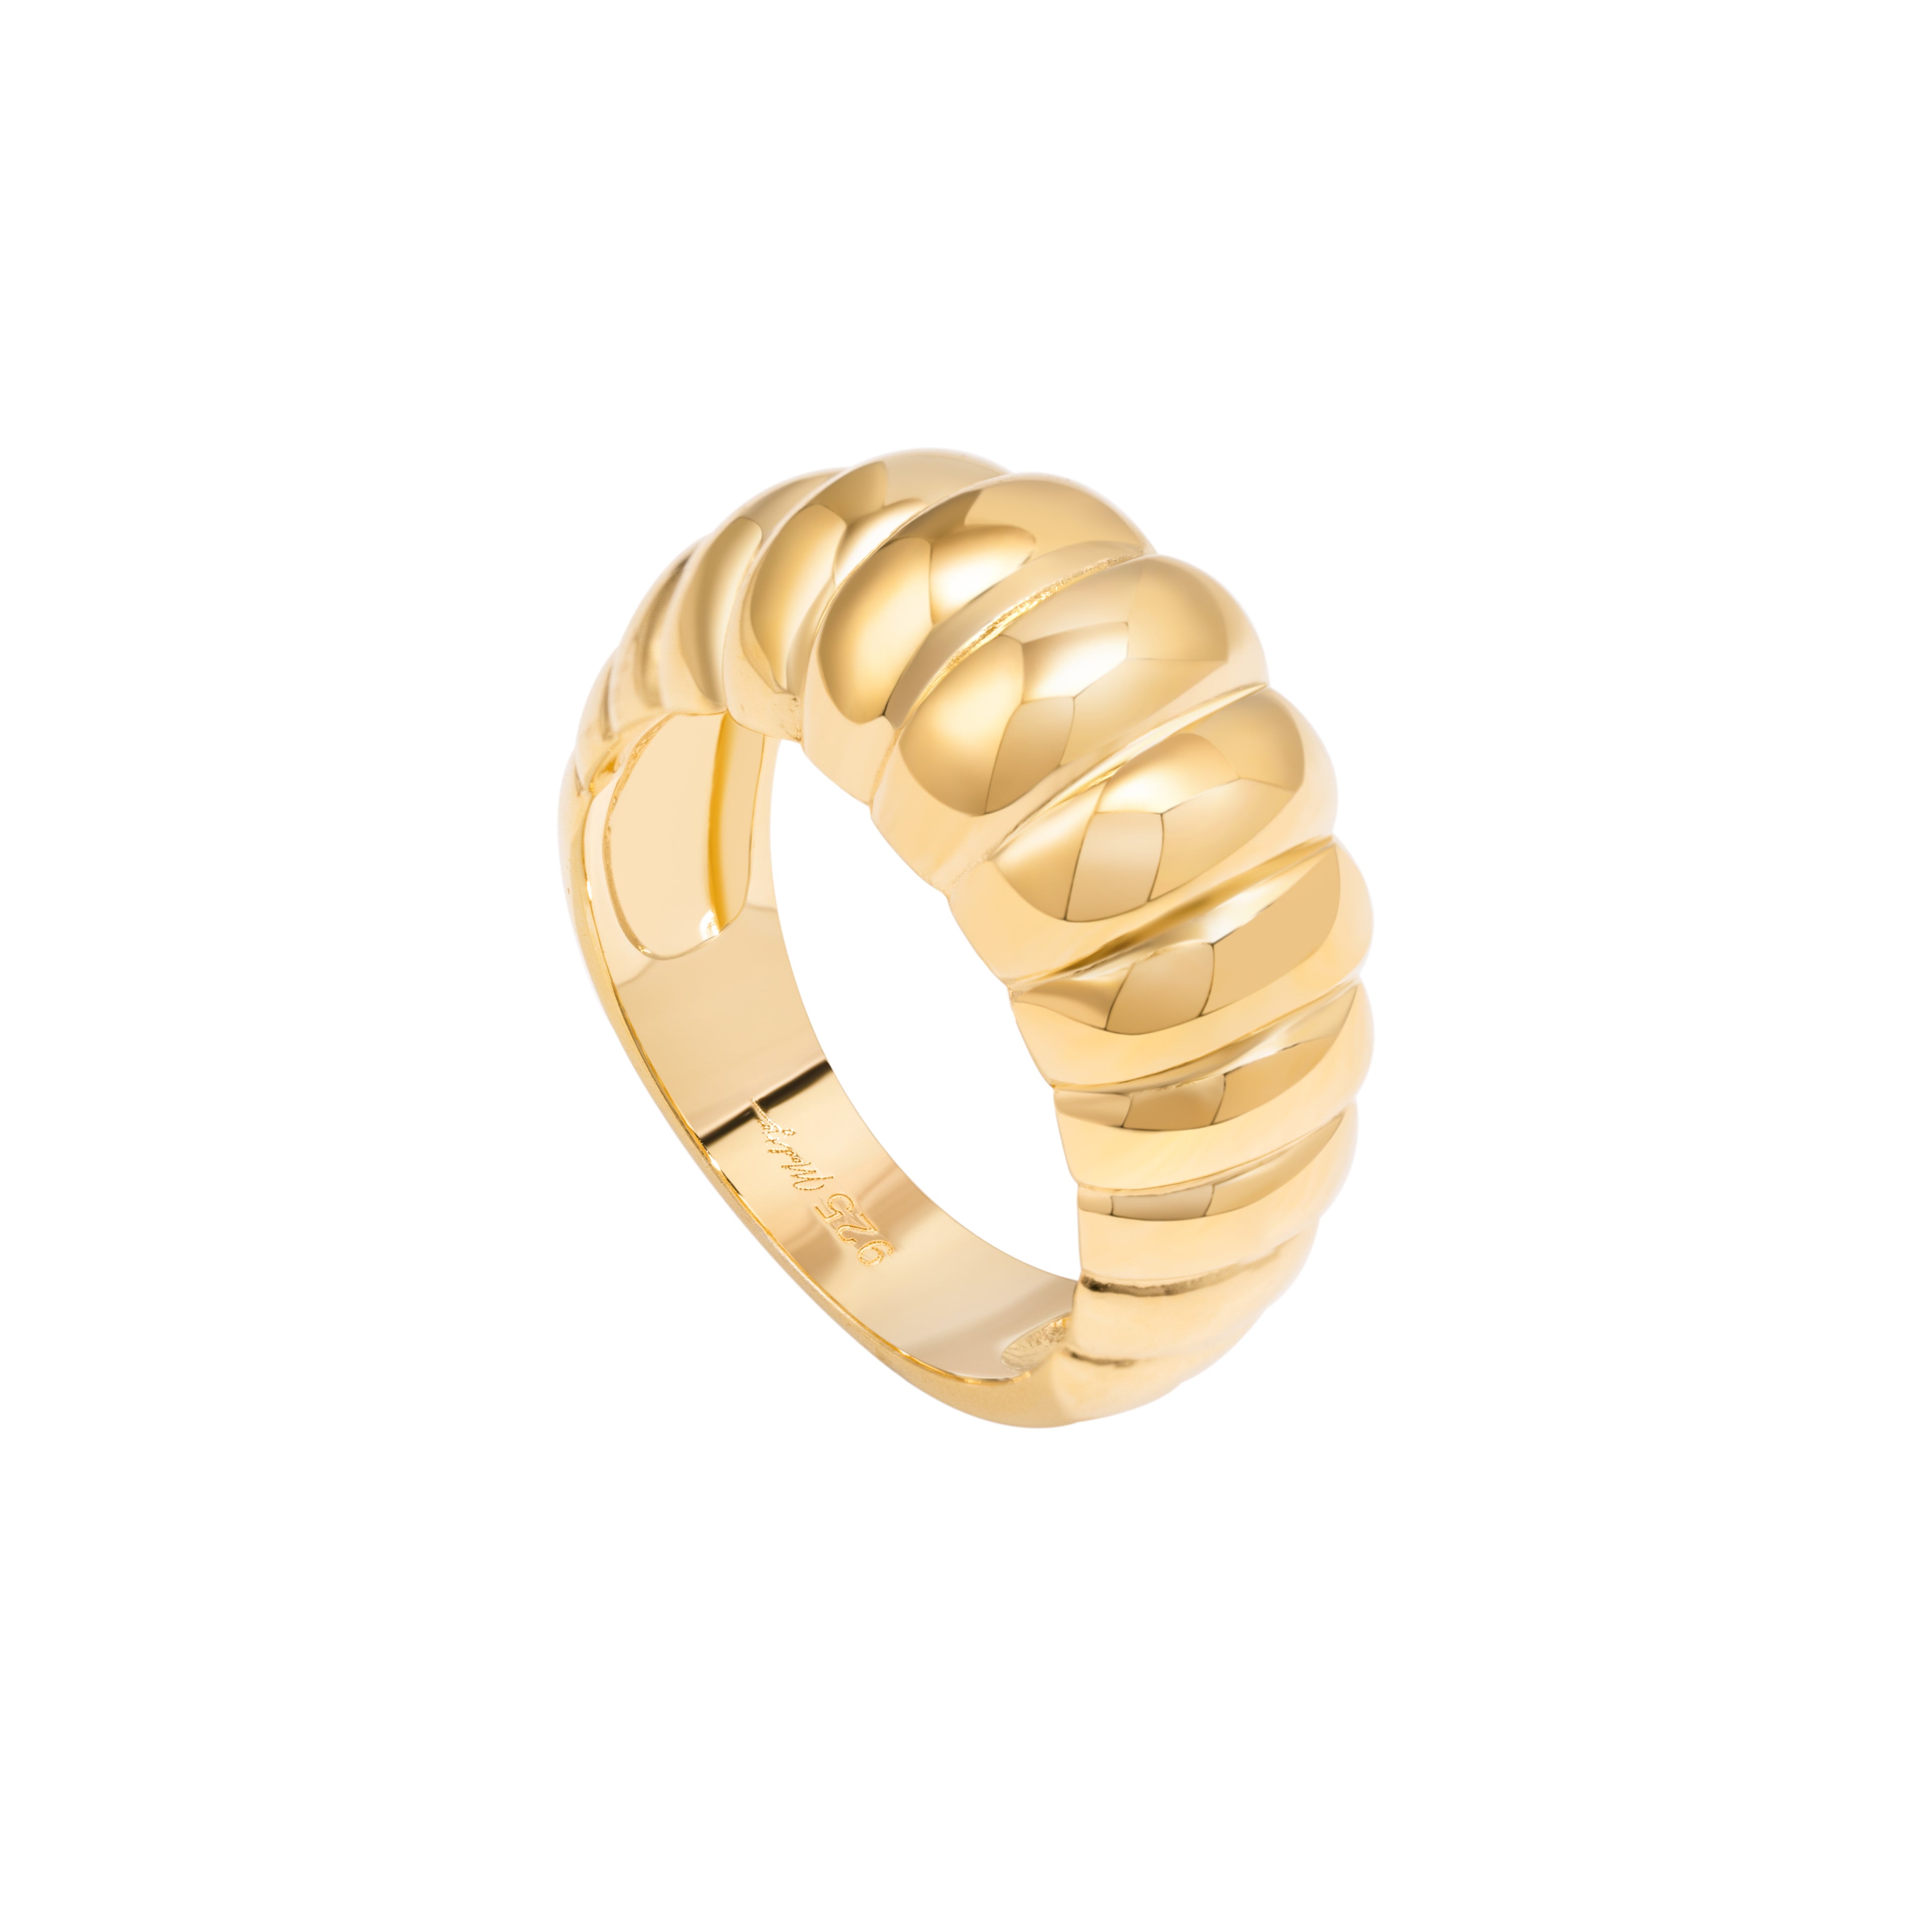 Rory Croissant Ring